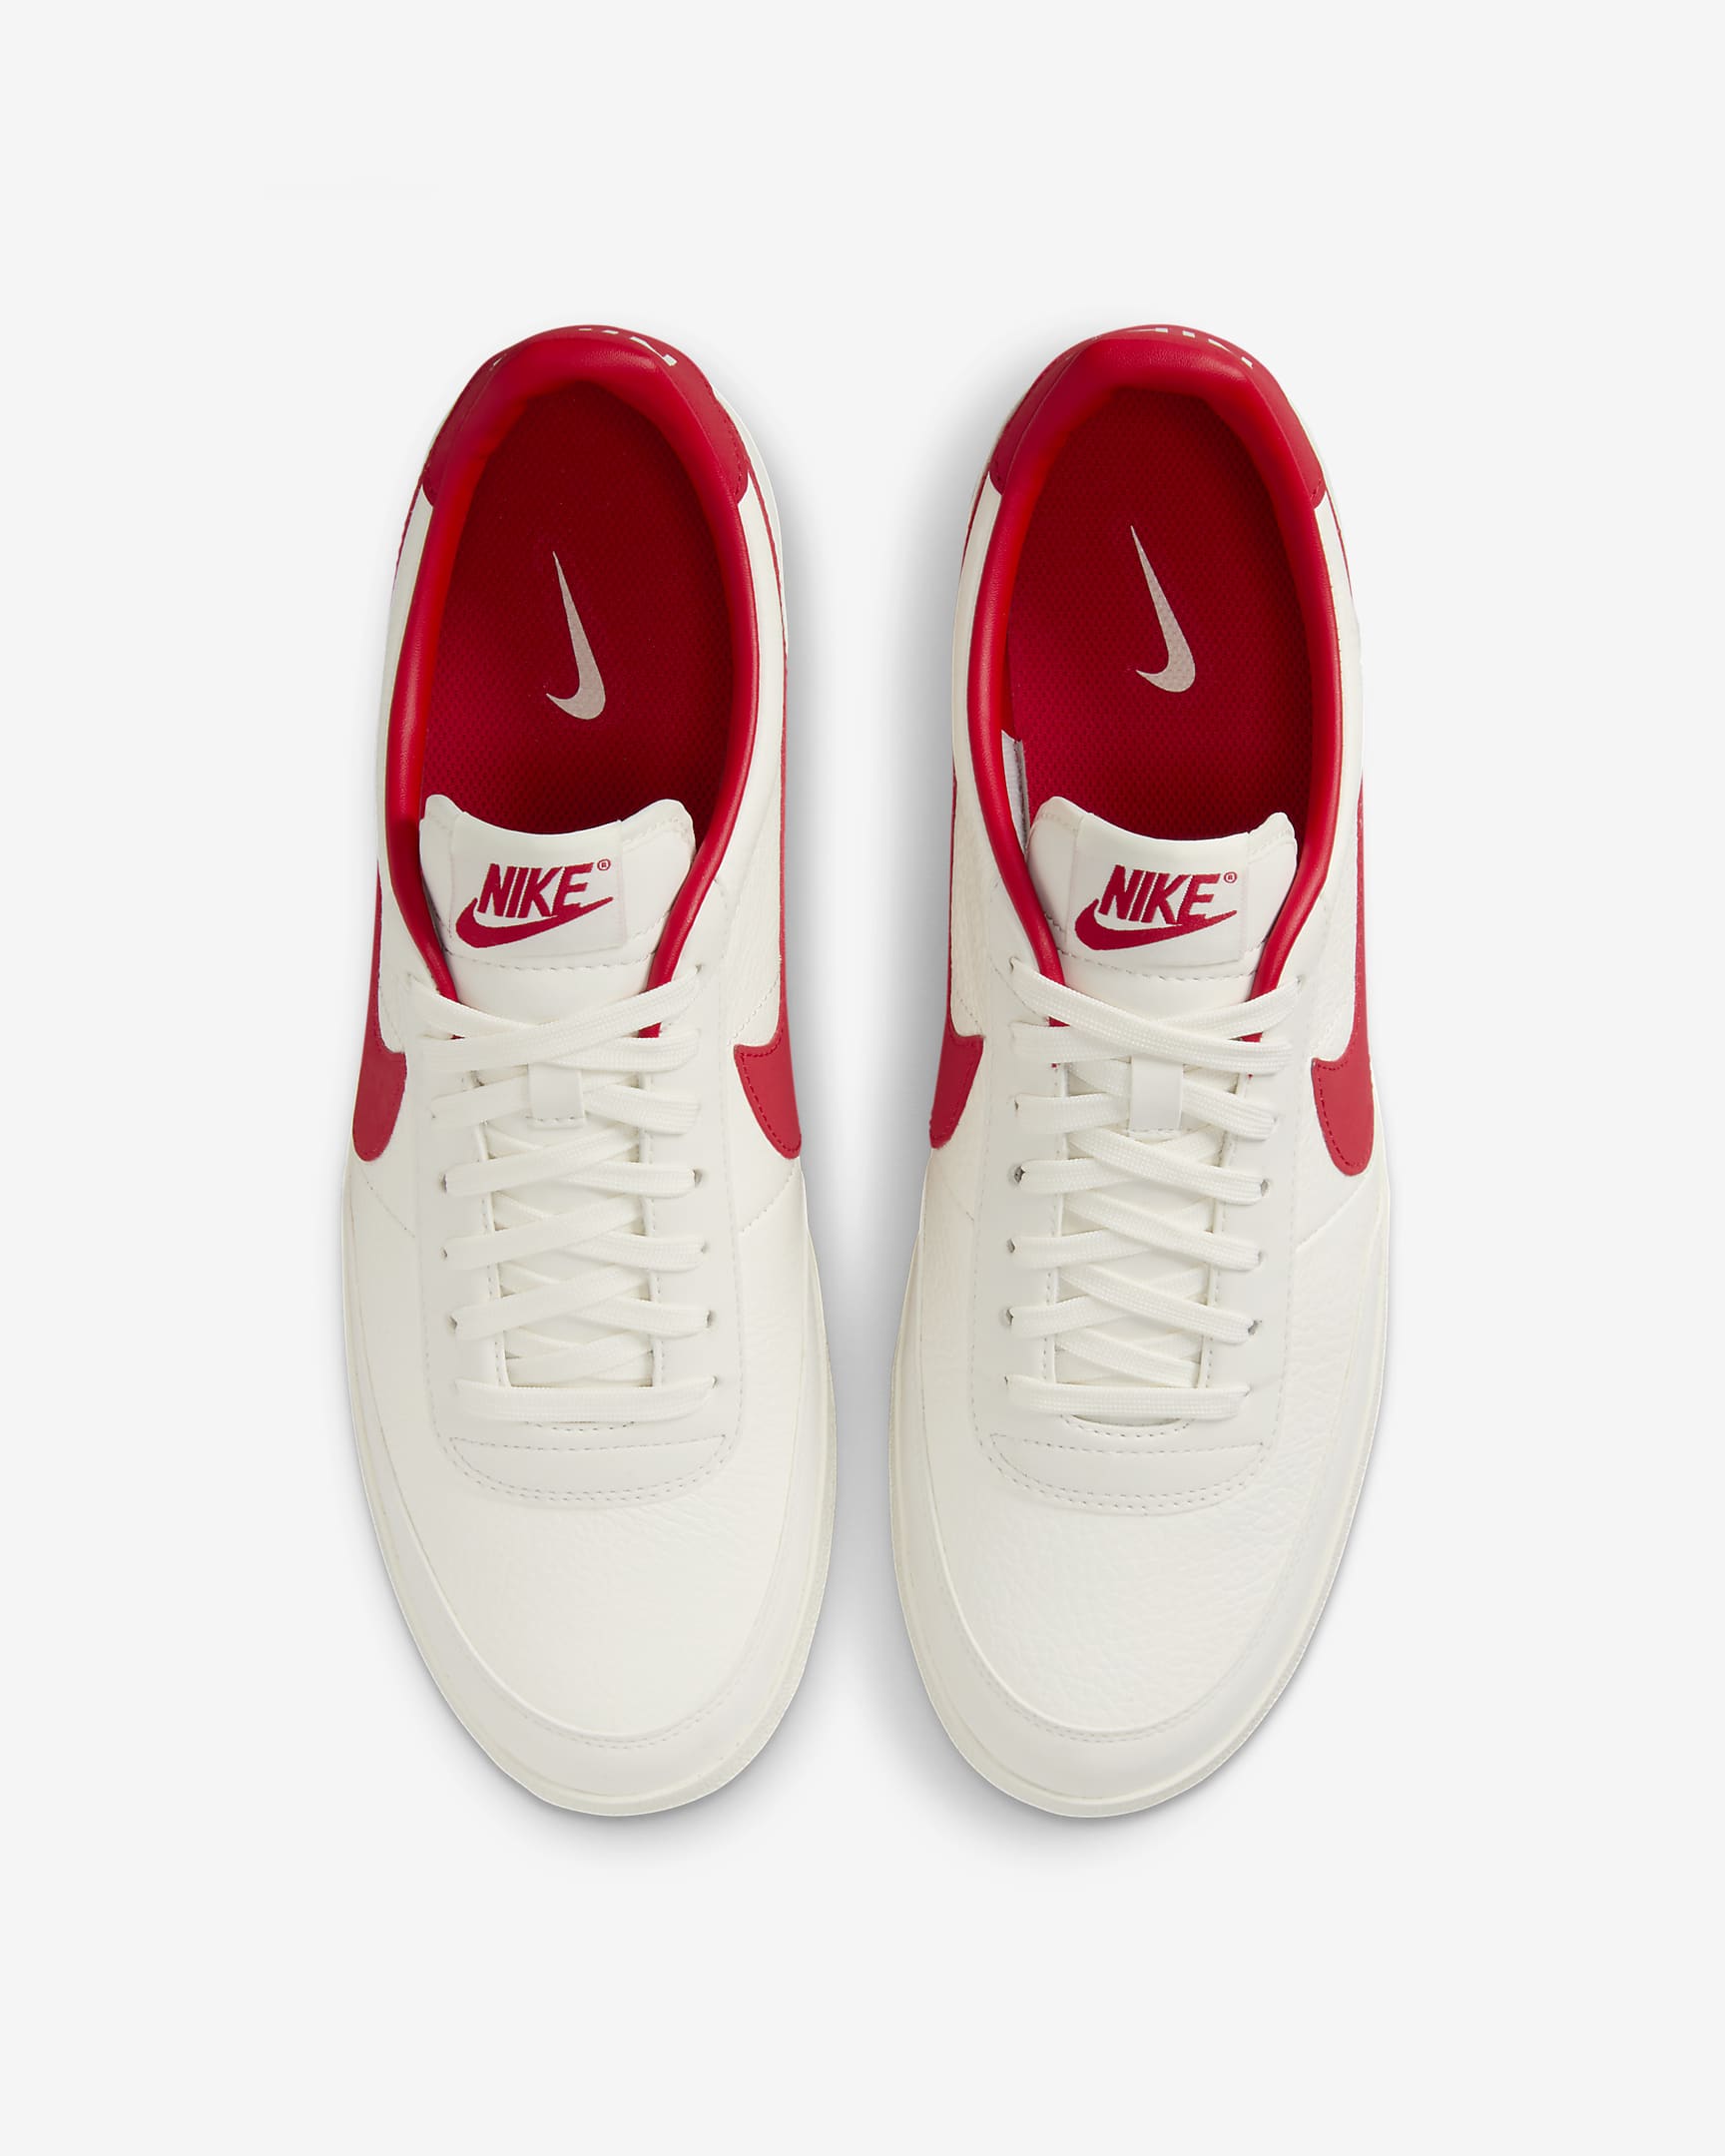 Nike Killshot 2 Leather Men’s Shoes Review: New Released with a Modern Touch